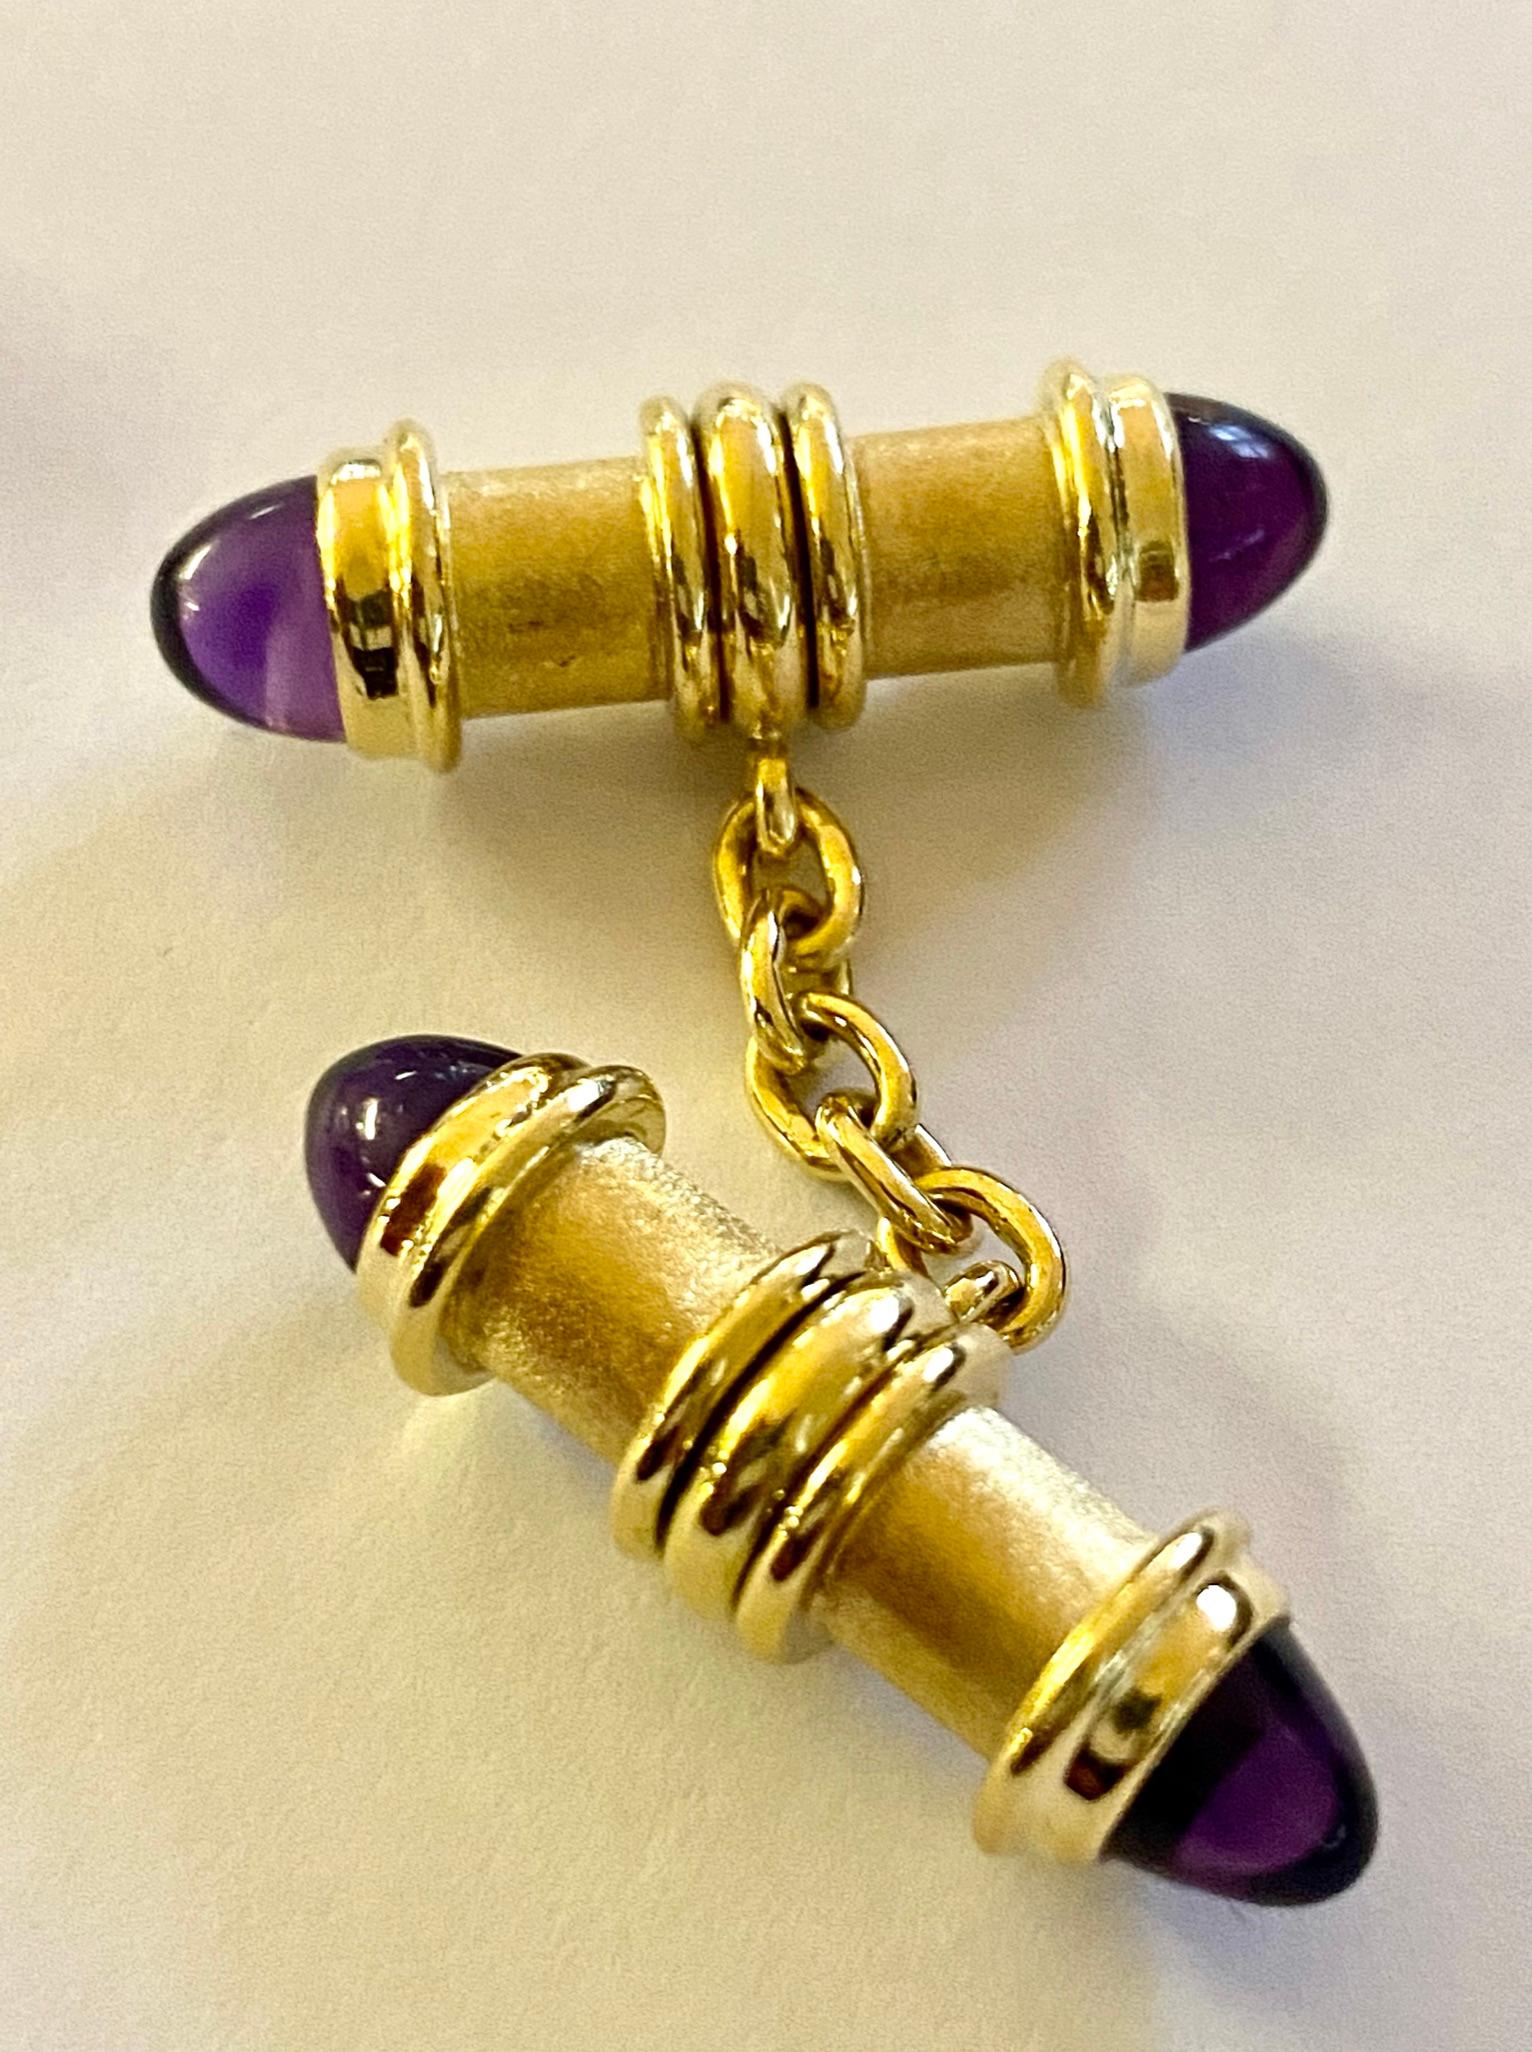 18K. yellow gold cufflinks. 4x Amethyst stones, Italy ca 1975 4x Amethyst stones in cabuchon cut.
Weight: 24.94 grams
size: 27 mm, diameter: 8 mm, chain length: 16 mm
Italy ca 1970